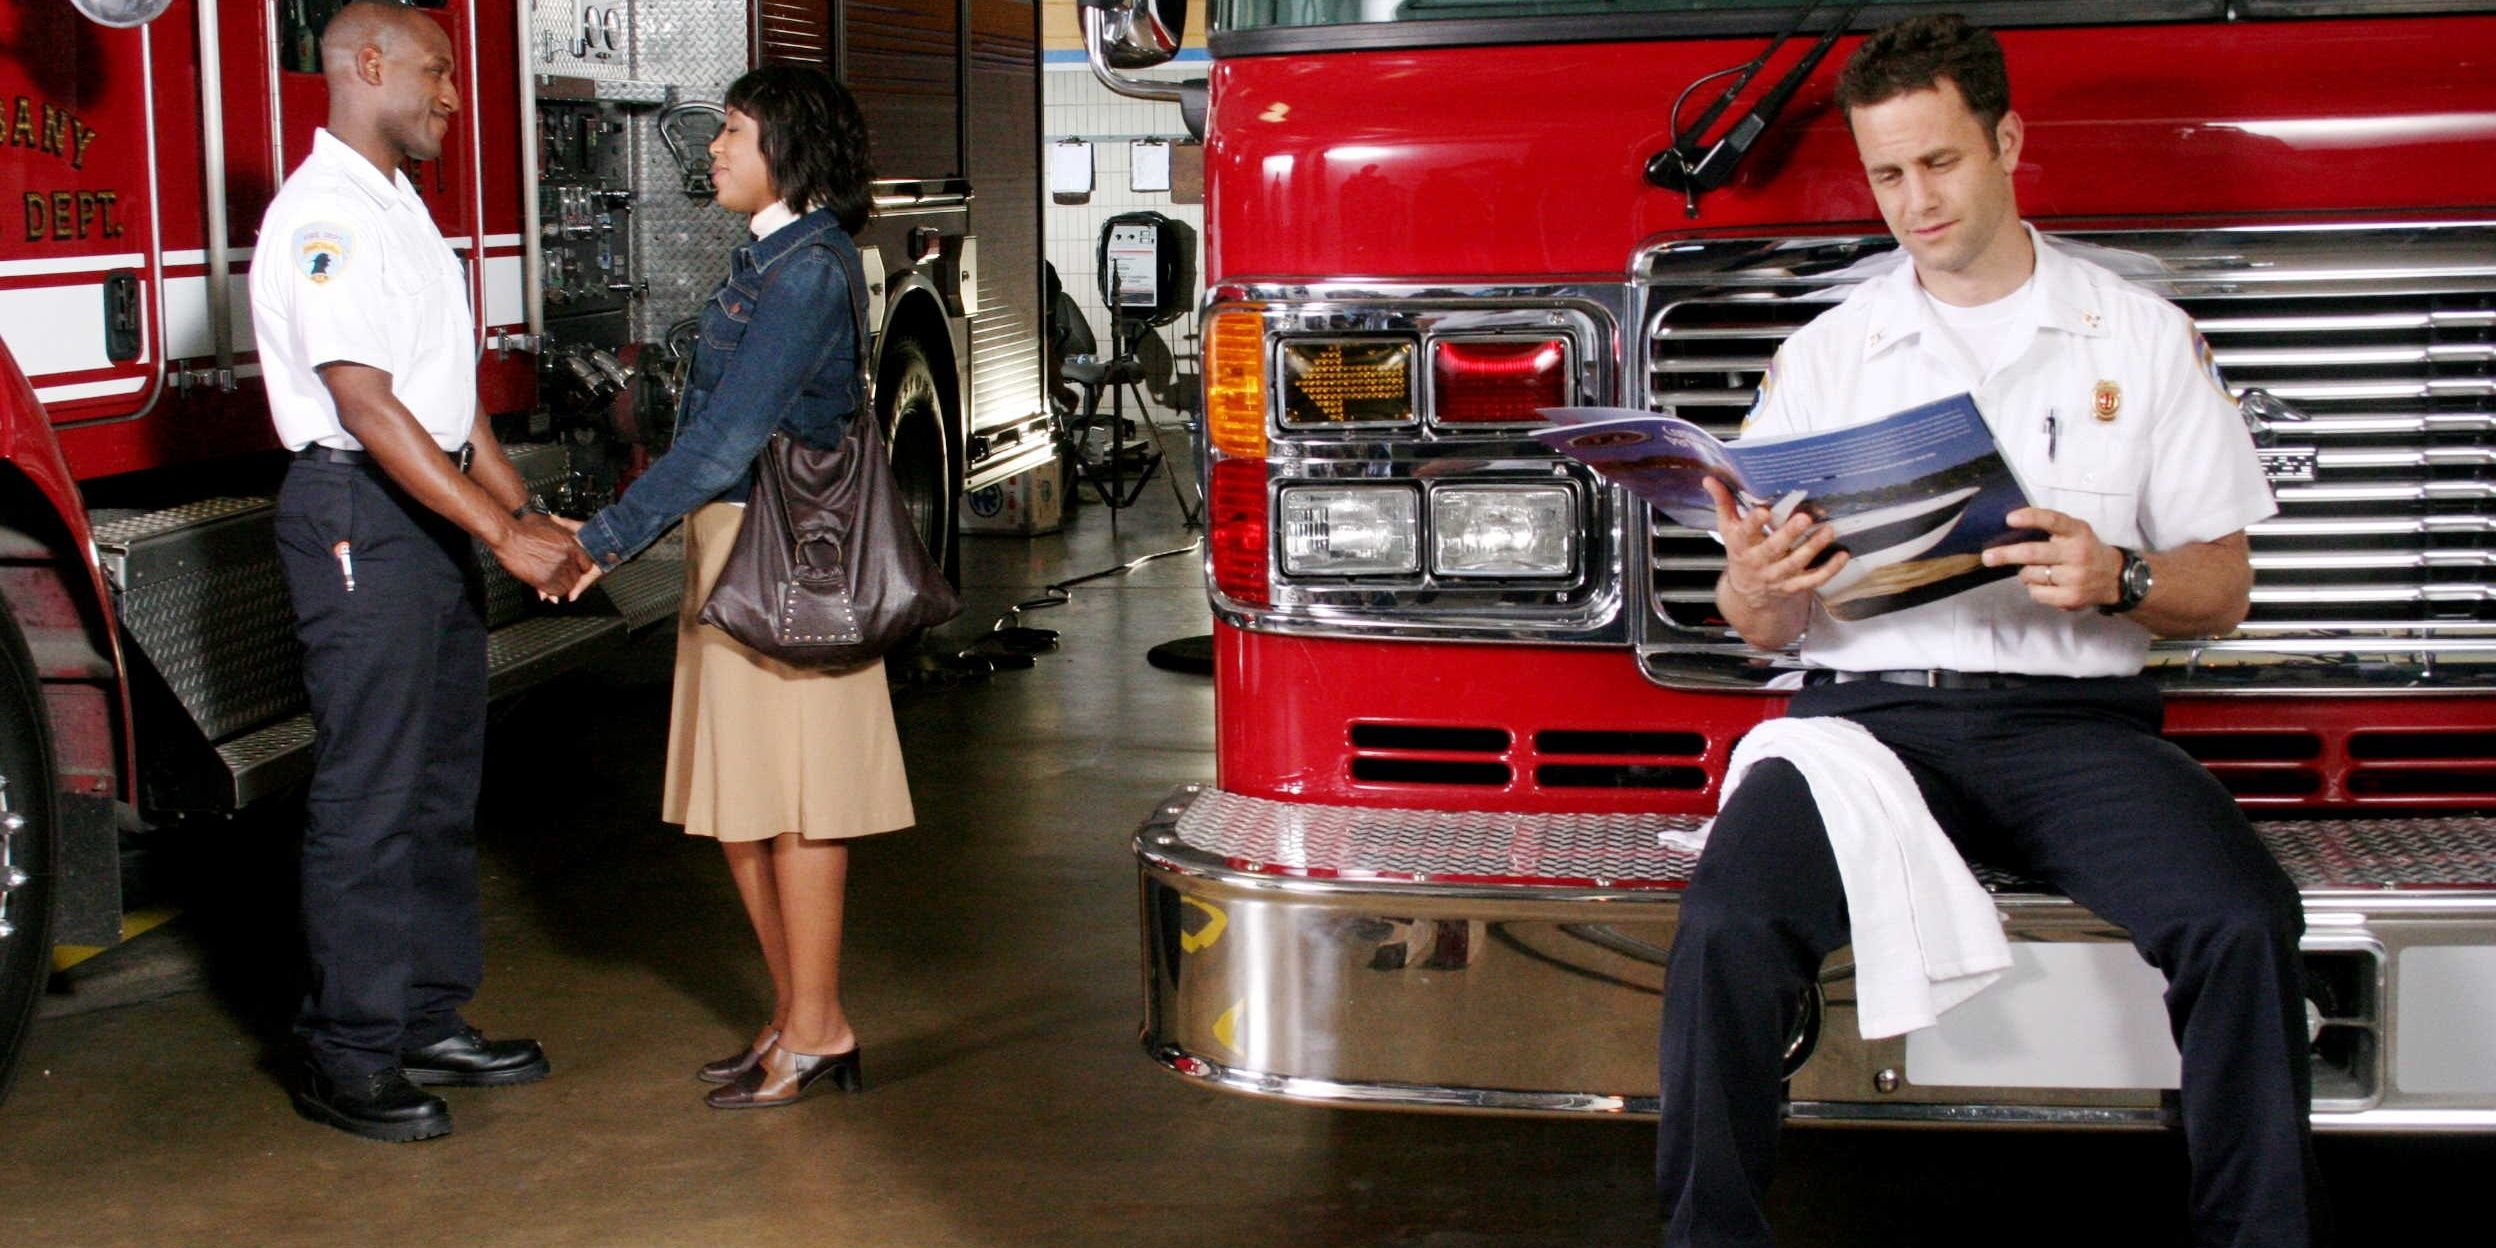 Kirk Camera reads a book on the front of a fire engine, a couple holds hands next to him in Fireproof.